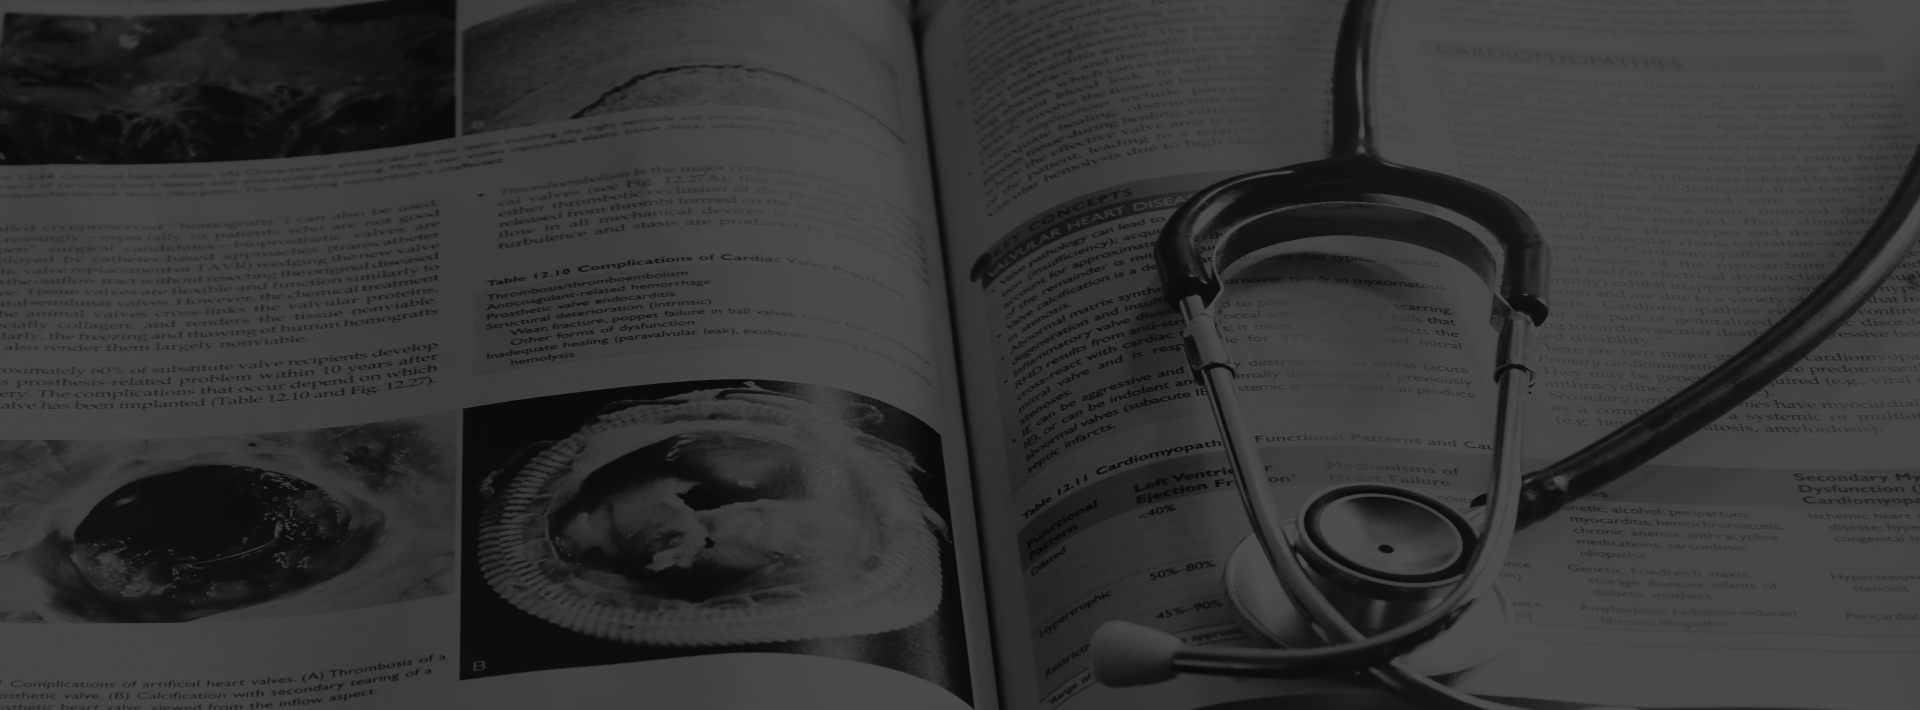 A black and white image of a stethoscope on an open book.